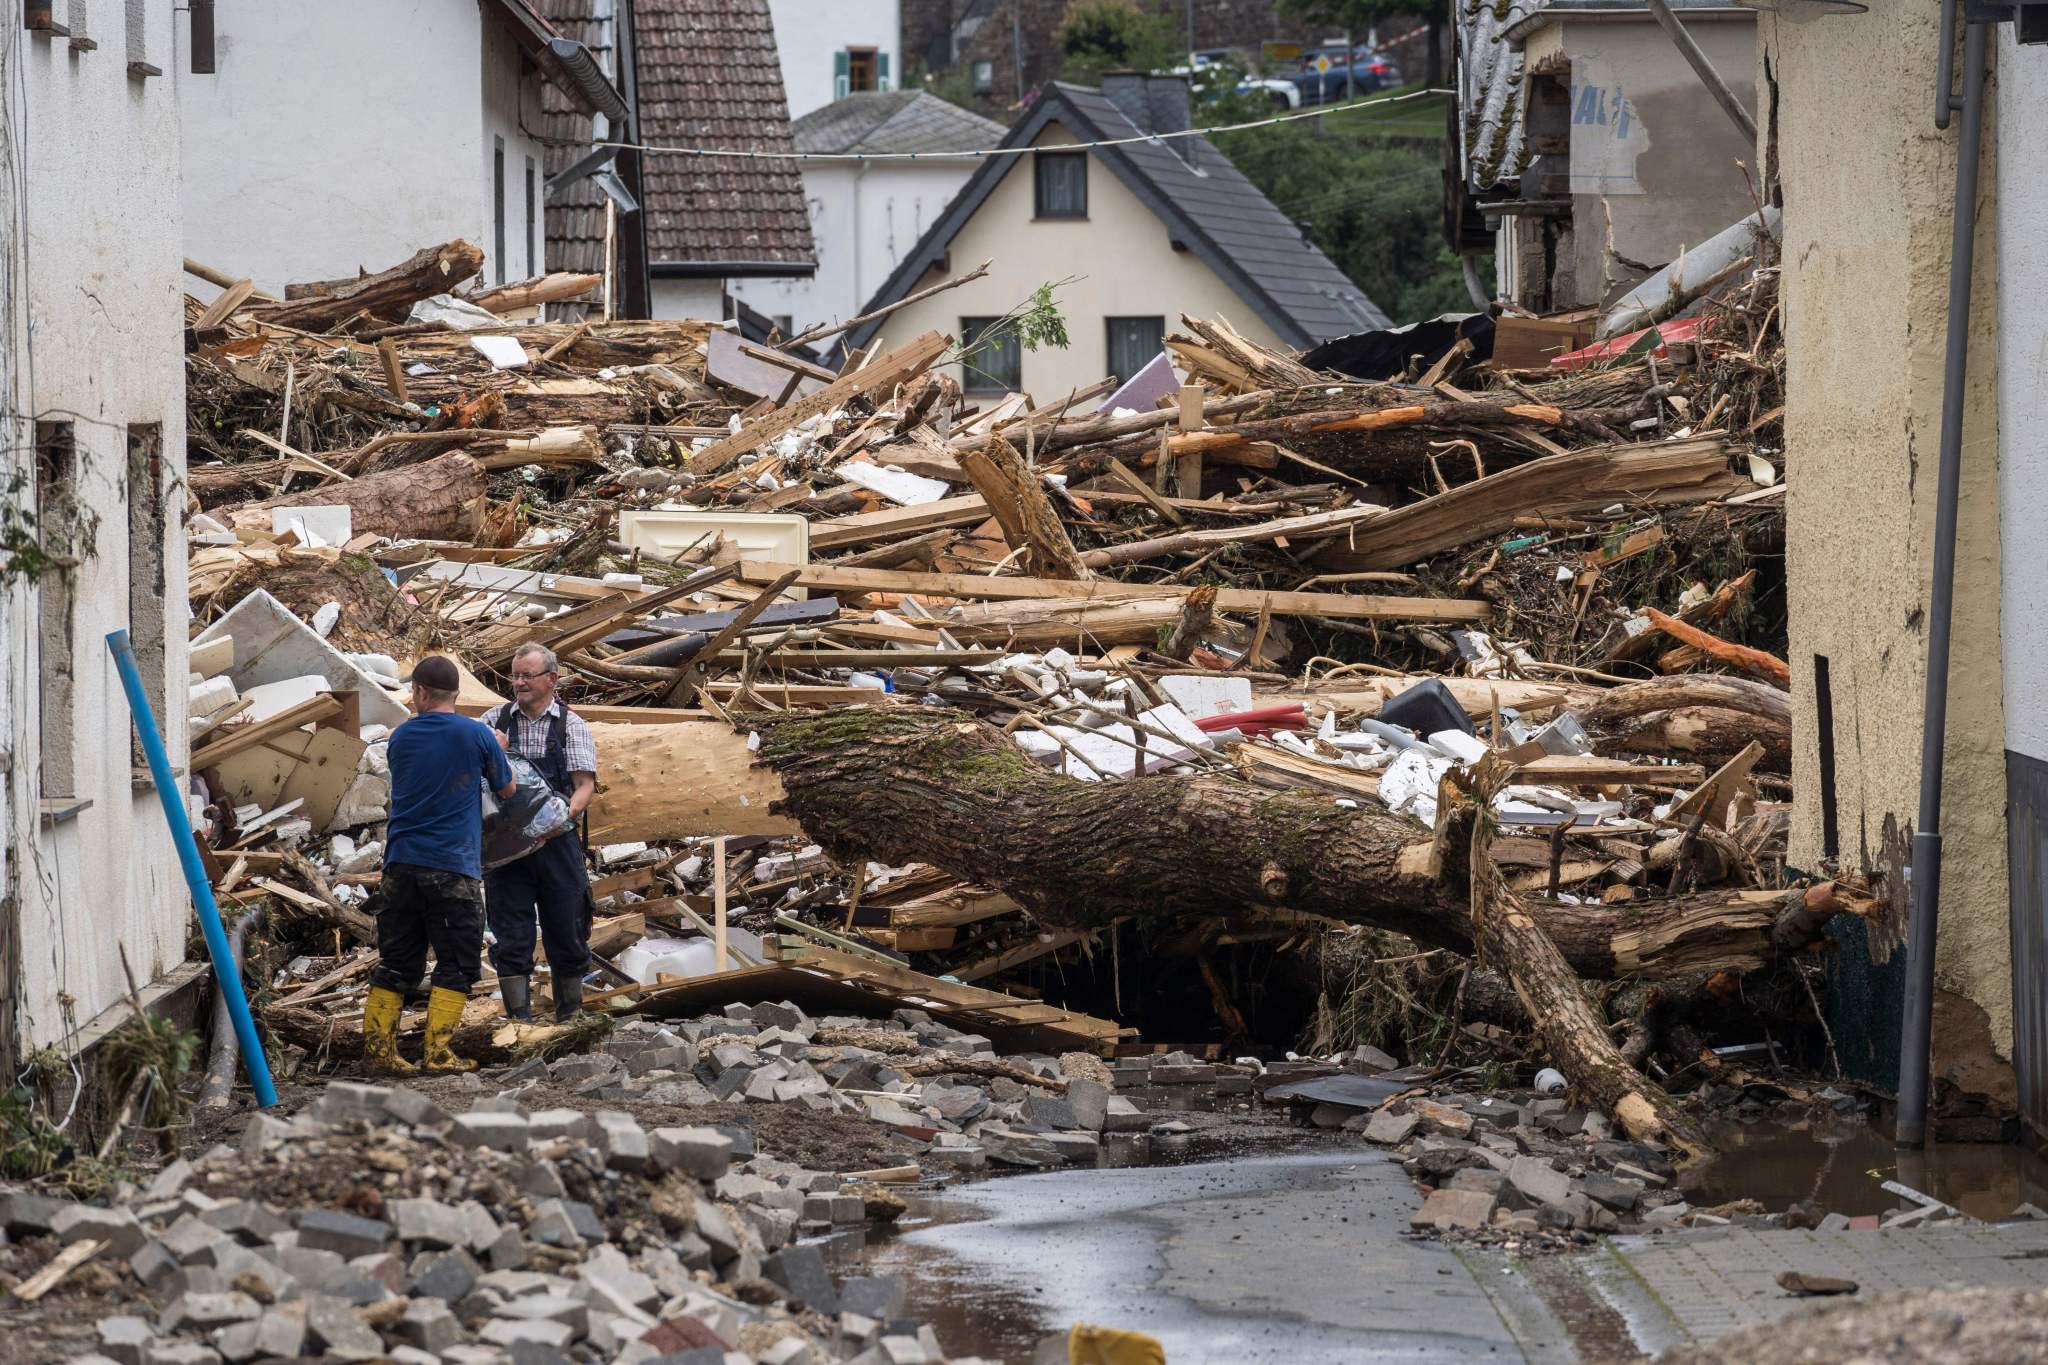 Two men try to remove goods from next to the debris of houses destroyed by the floods in Schuld.